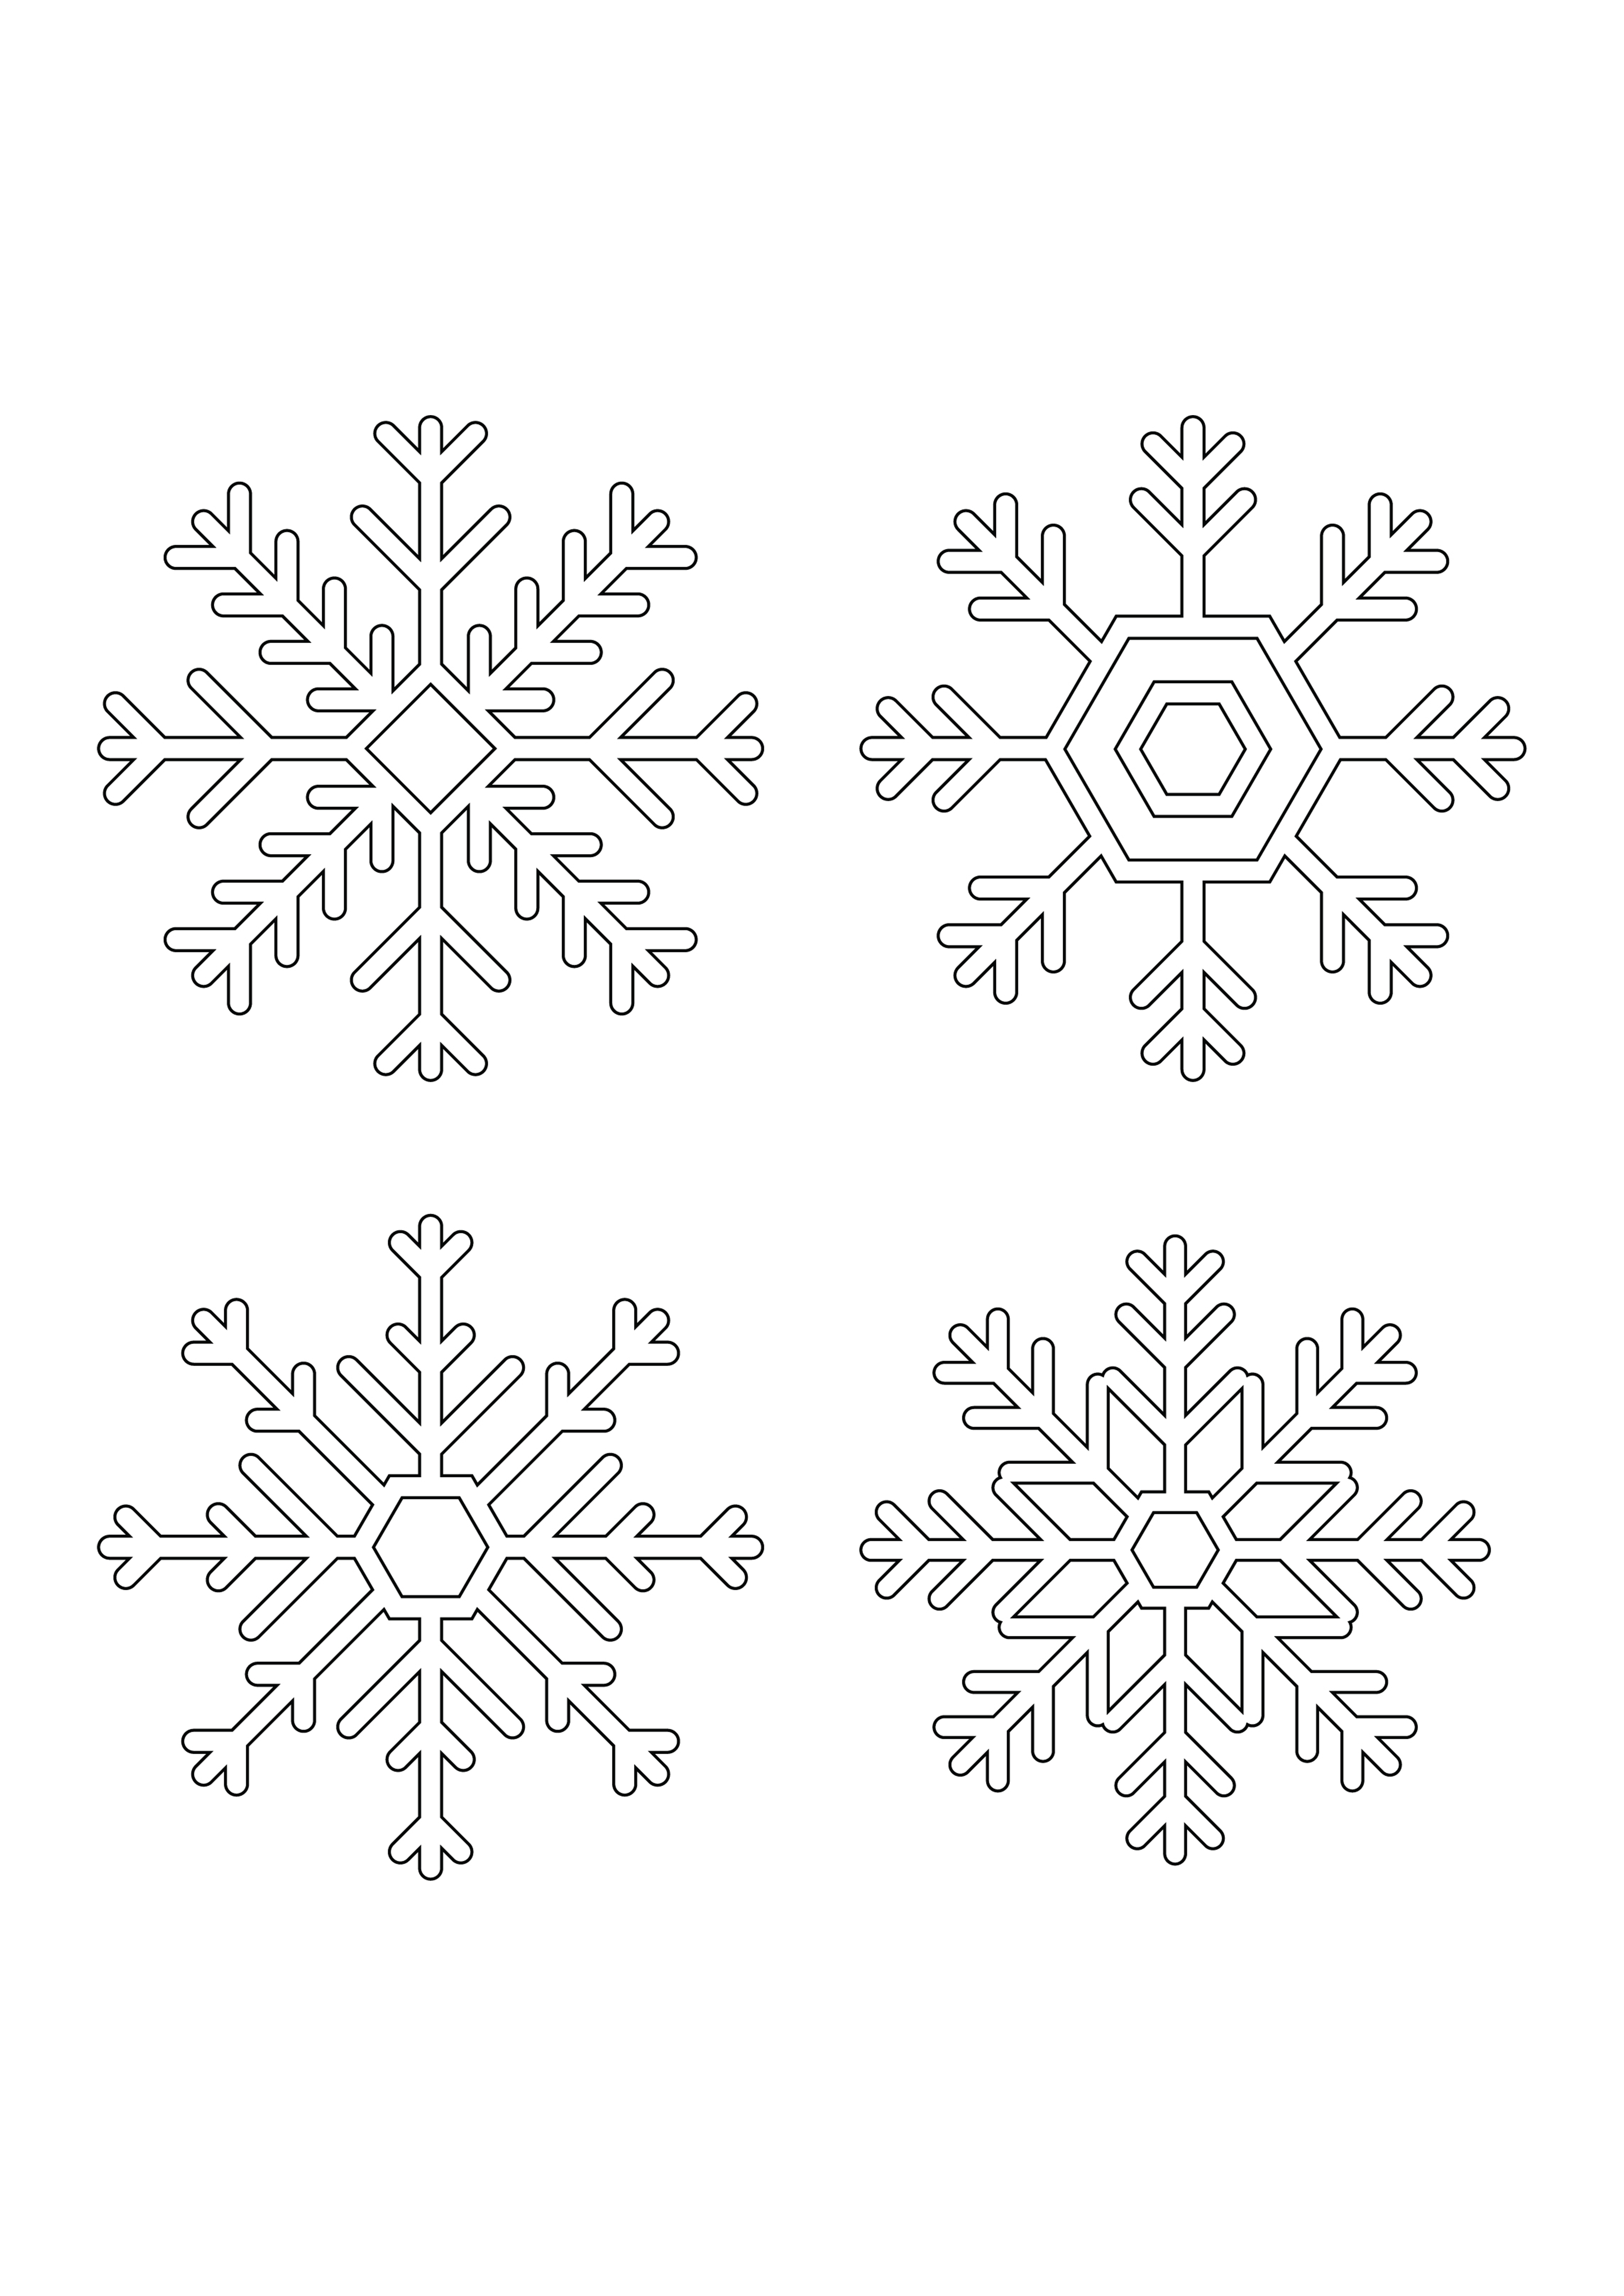 Four flakes template free coloring sheet to print for easy learning